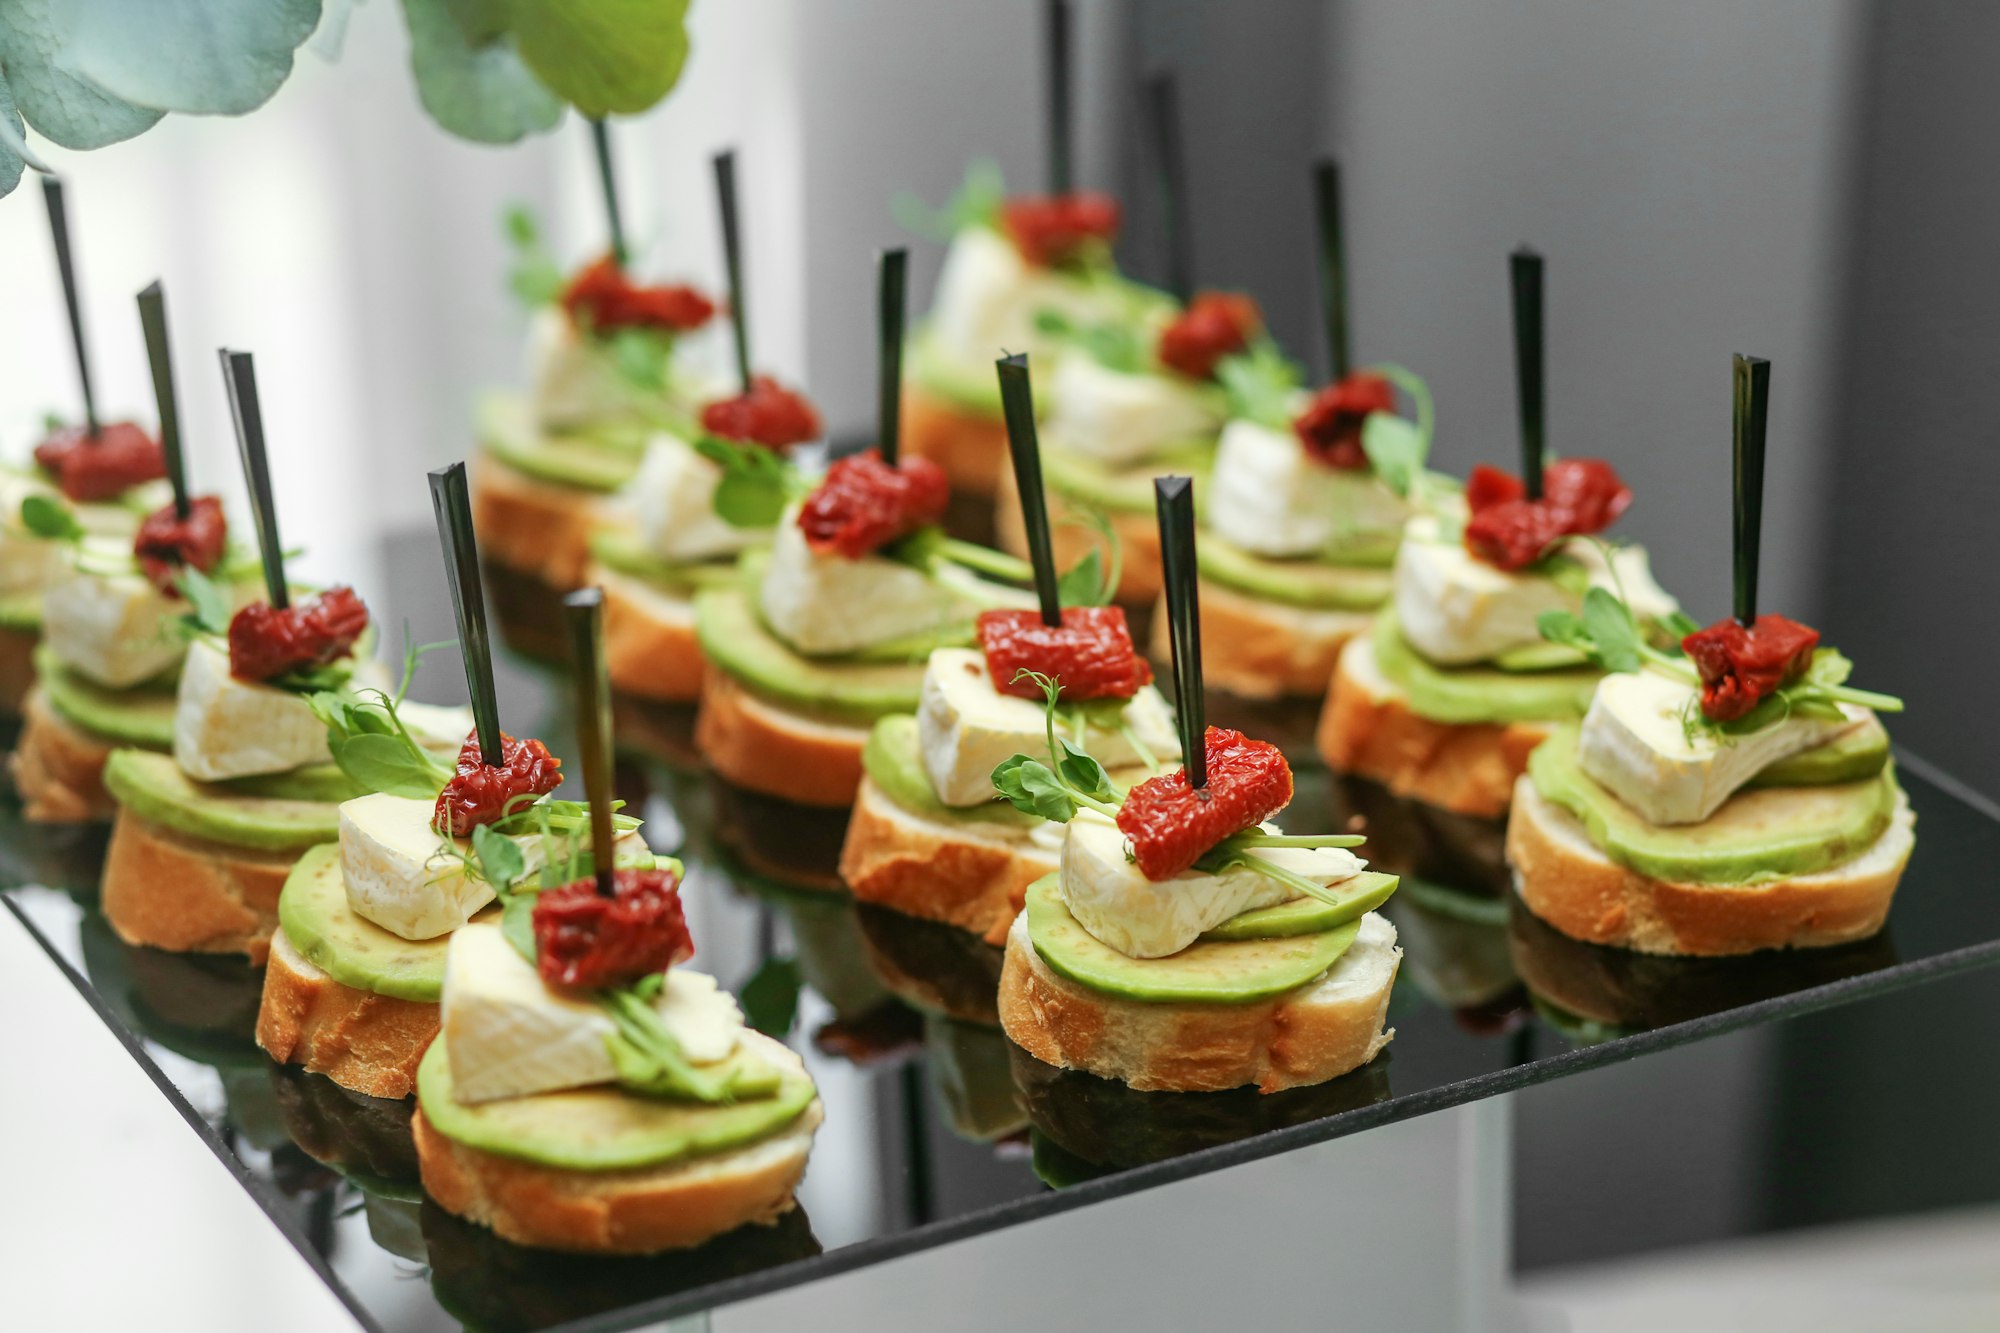 Festive decorated canapes for event with avocado and cheese and dried tomatoes. Eating at the event